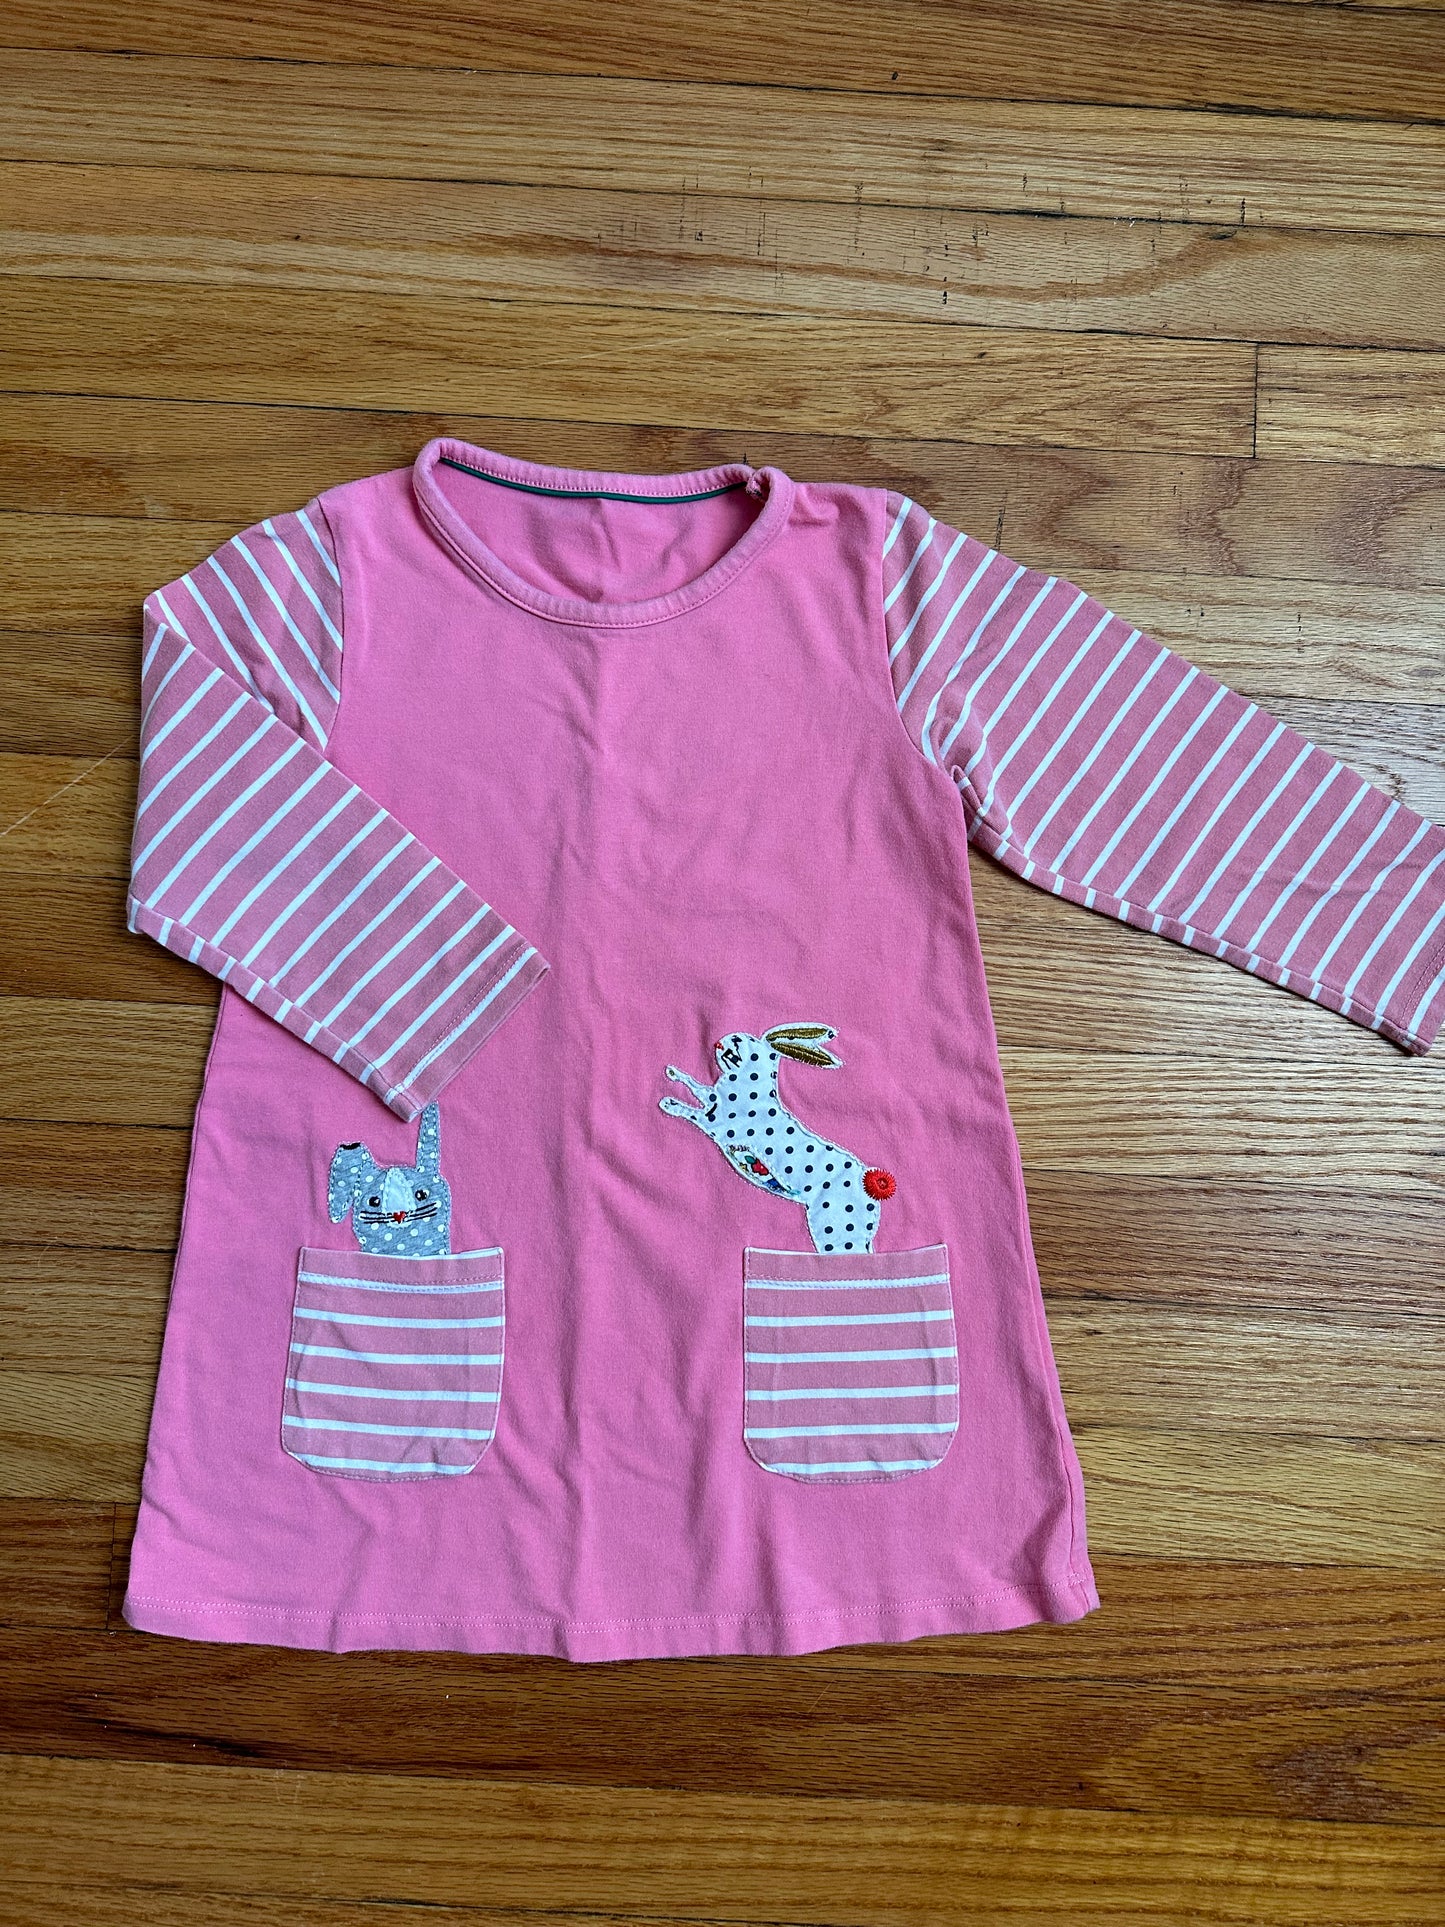 Faux Boden Bunny Top, Pink, Girls 3-4T